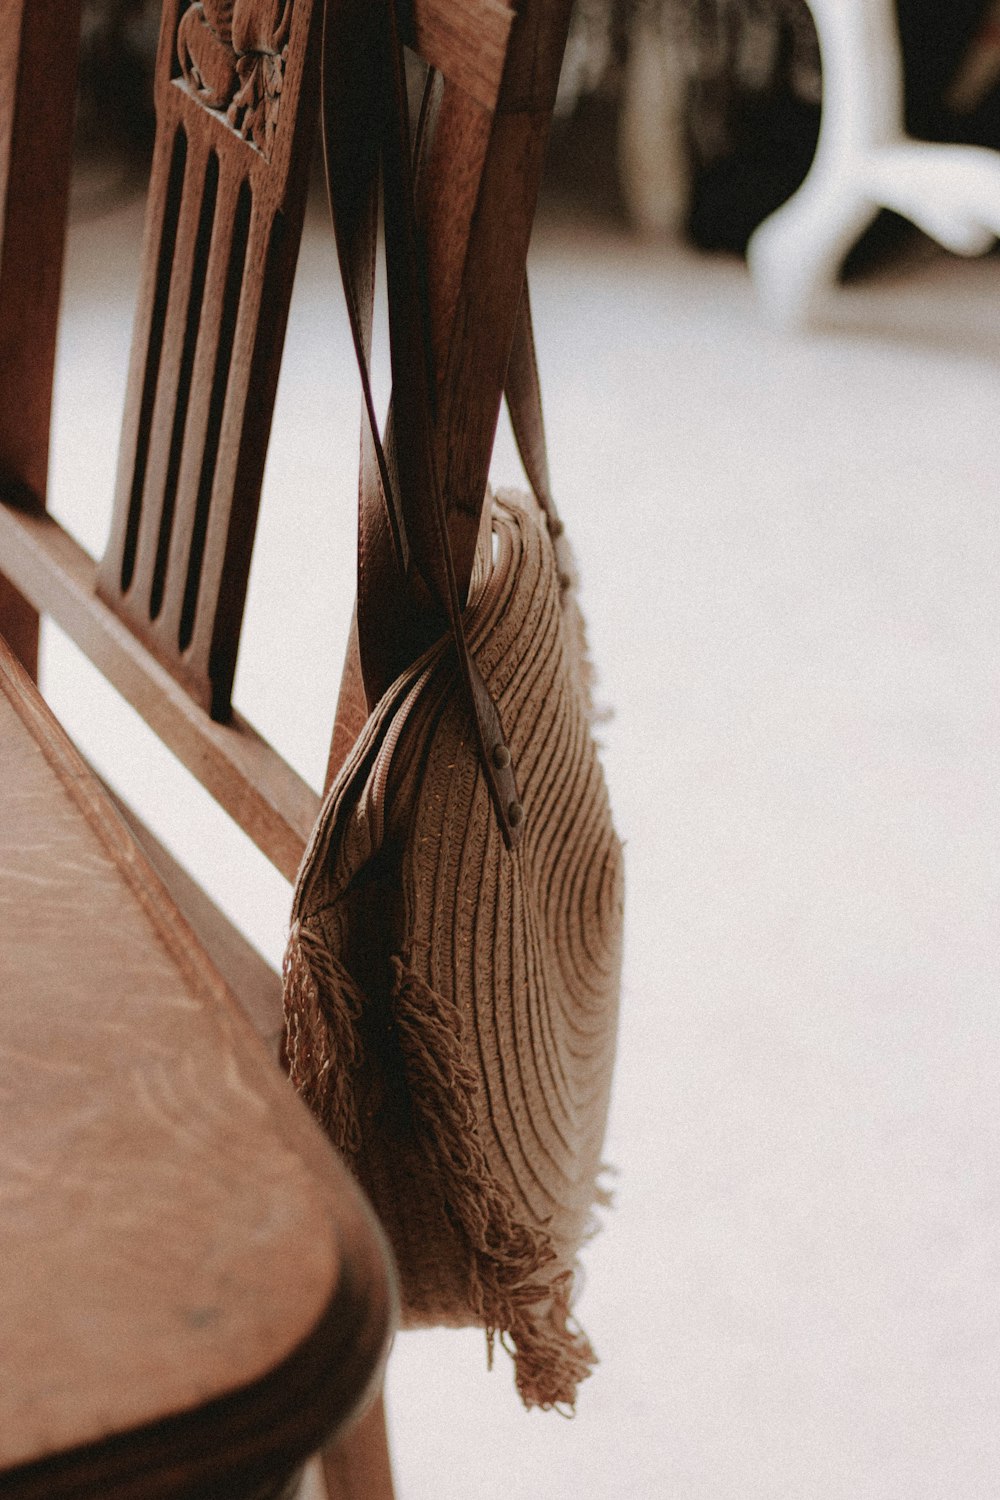 a close up of a wooden bench with a bag hanging from it